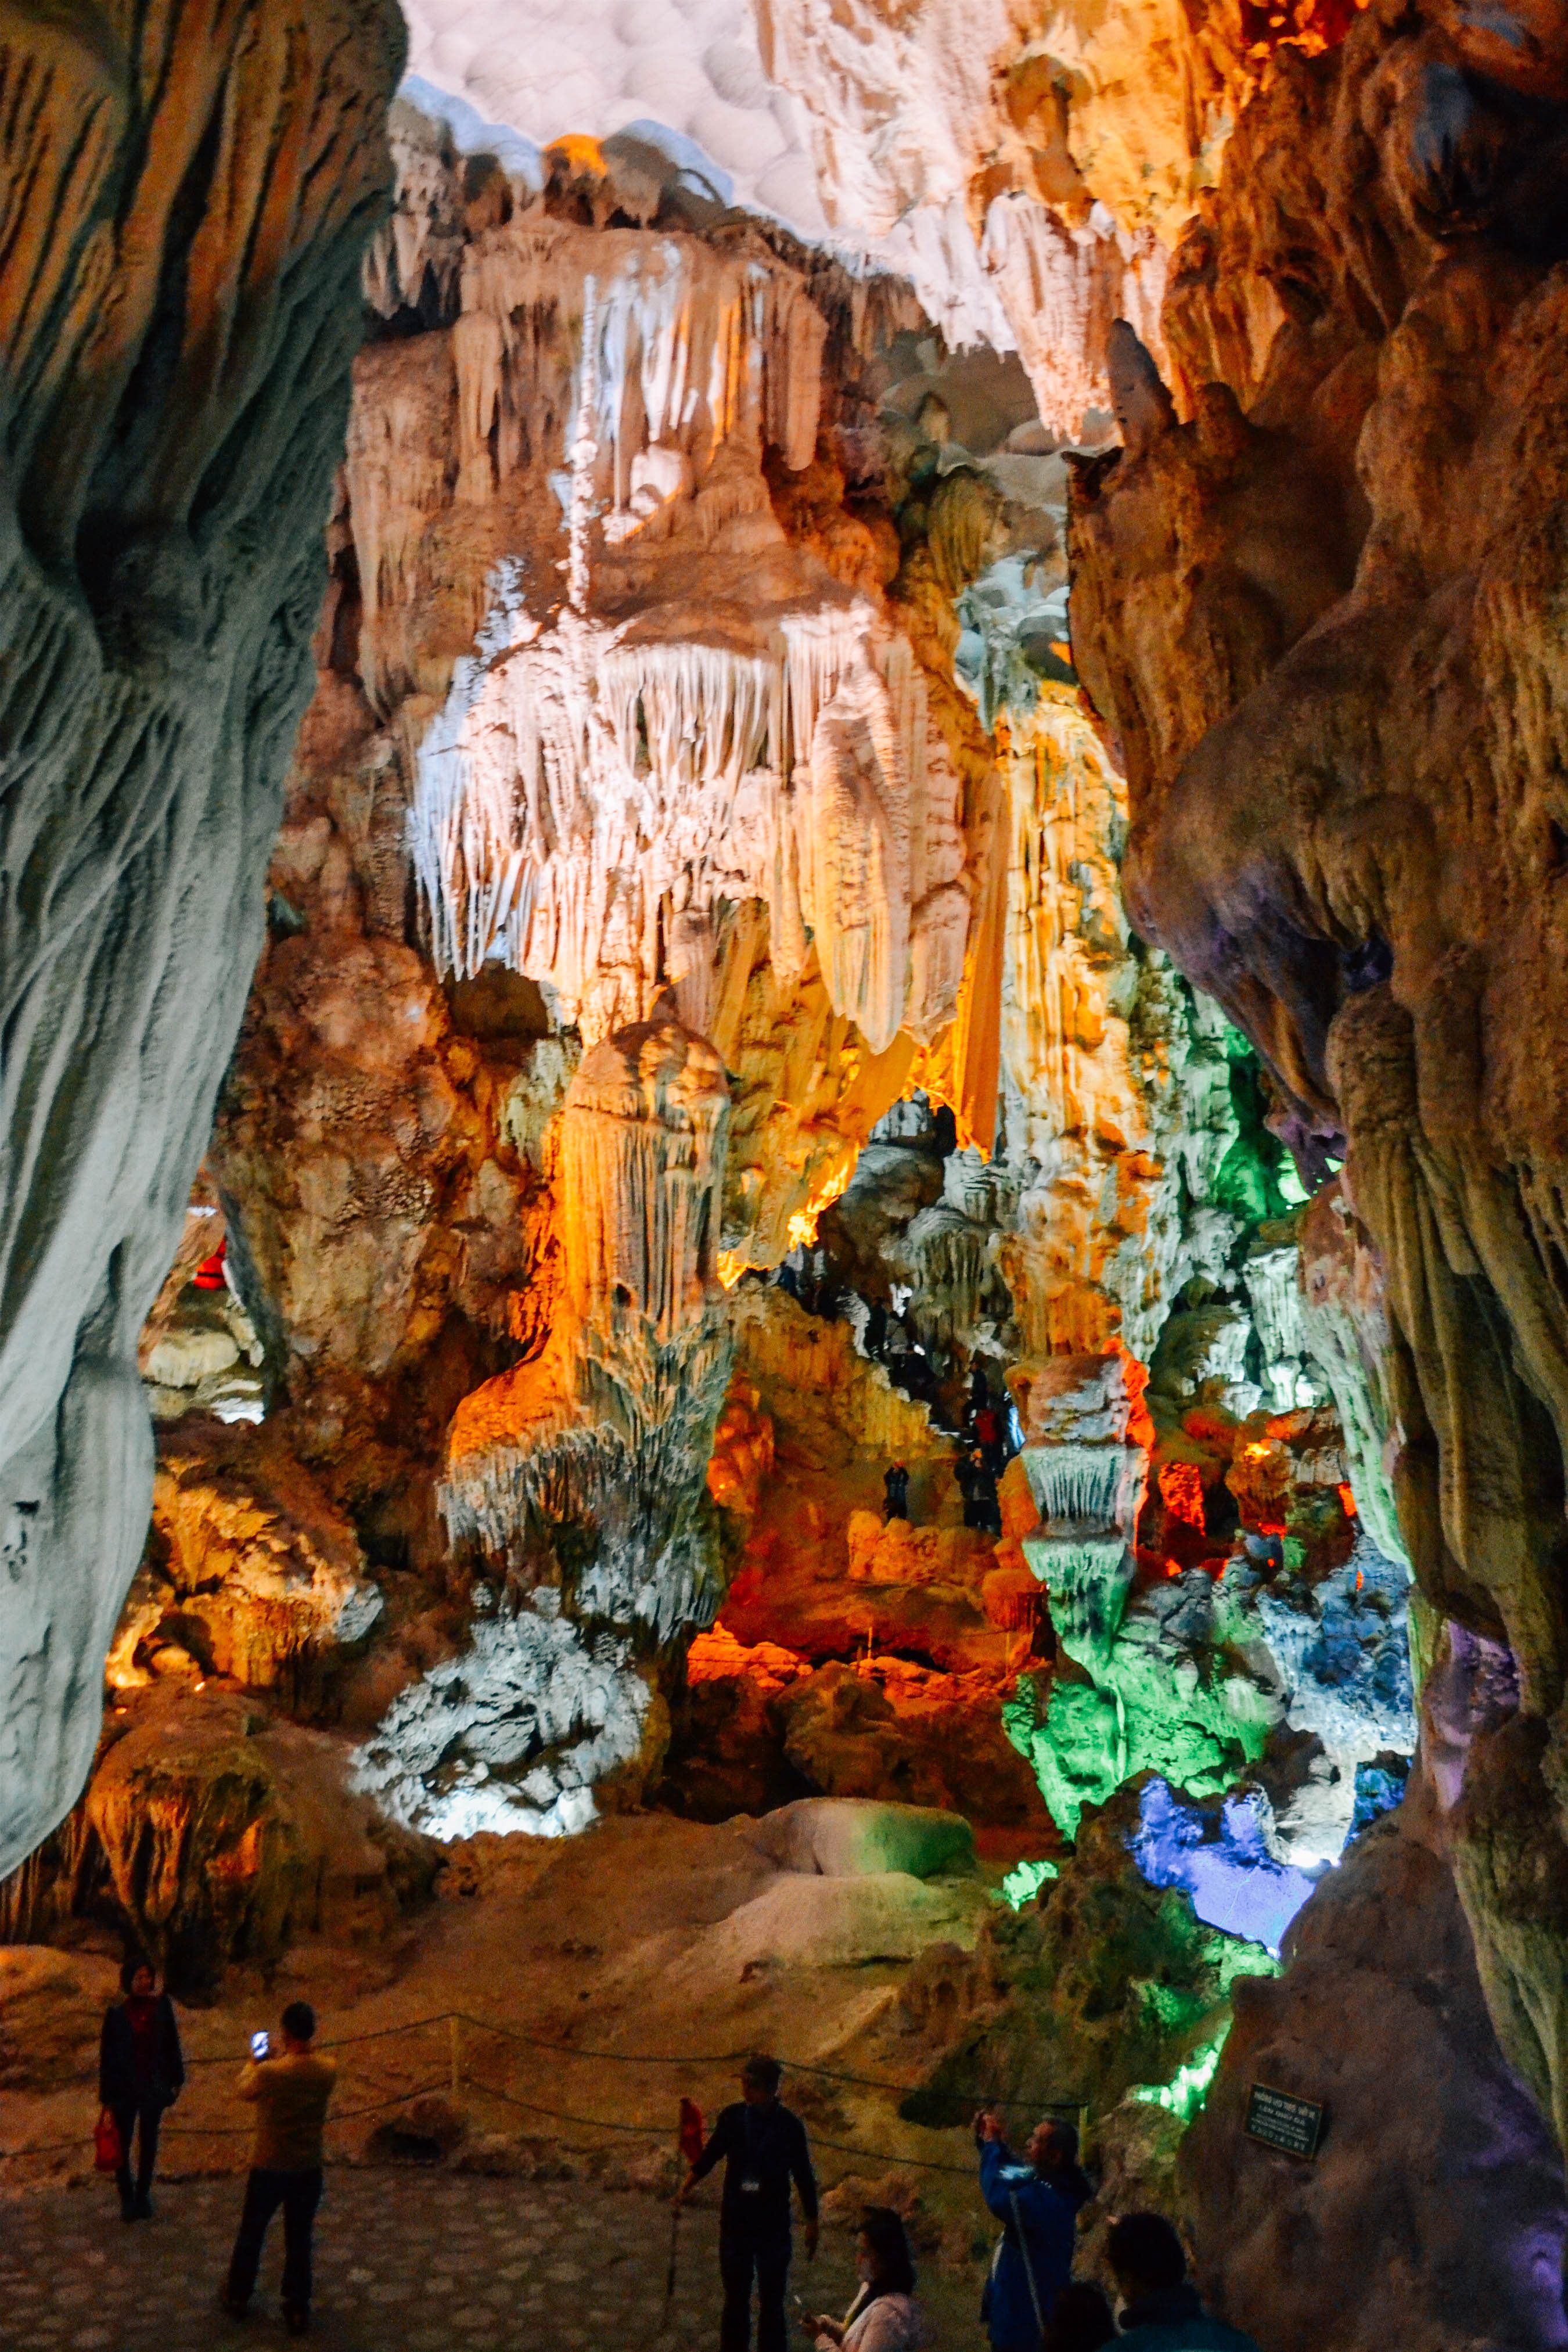 Inside the Dong Thien Cung cave 